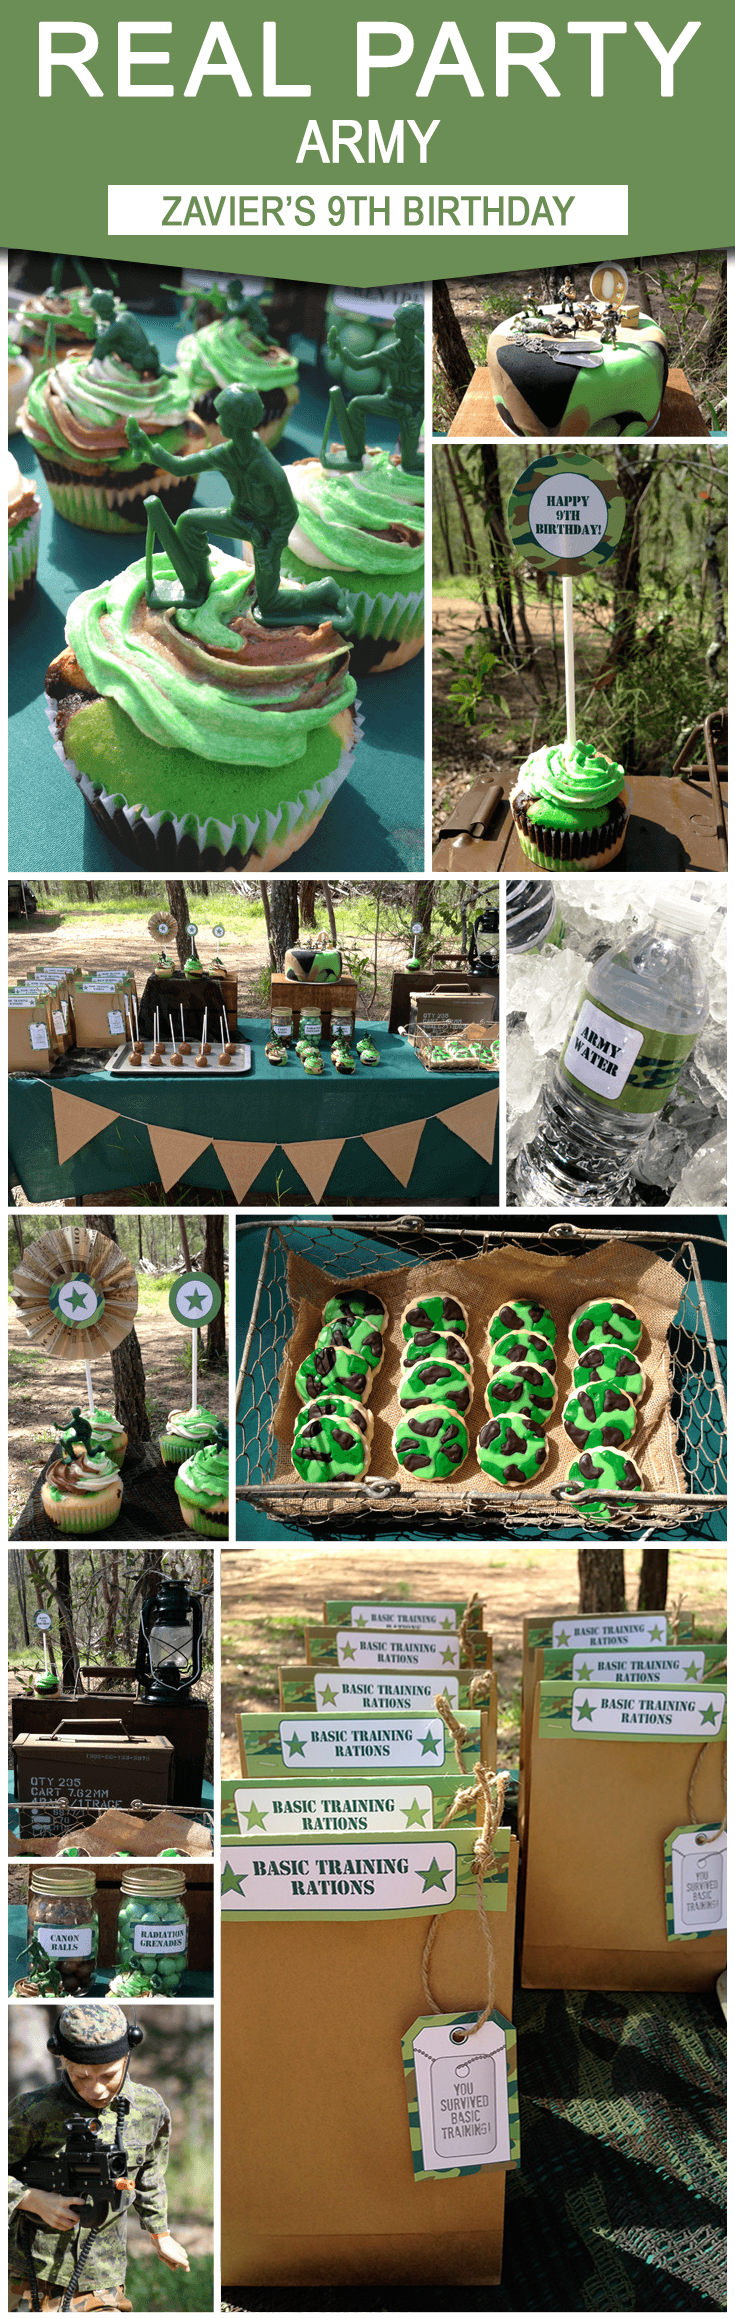 Camo Birthday Party Theme | Zavier's 9th Army Birthday Party from Sarah at Chai Days | Army Party Ideas | Decorated with SIMONEmadeit.com DIY Printable Templates